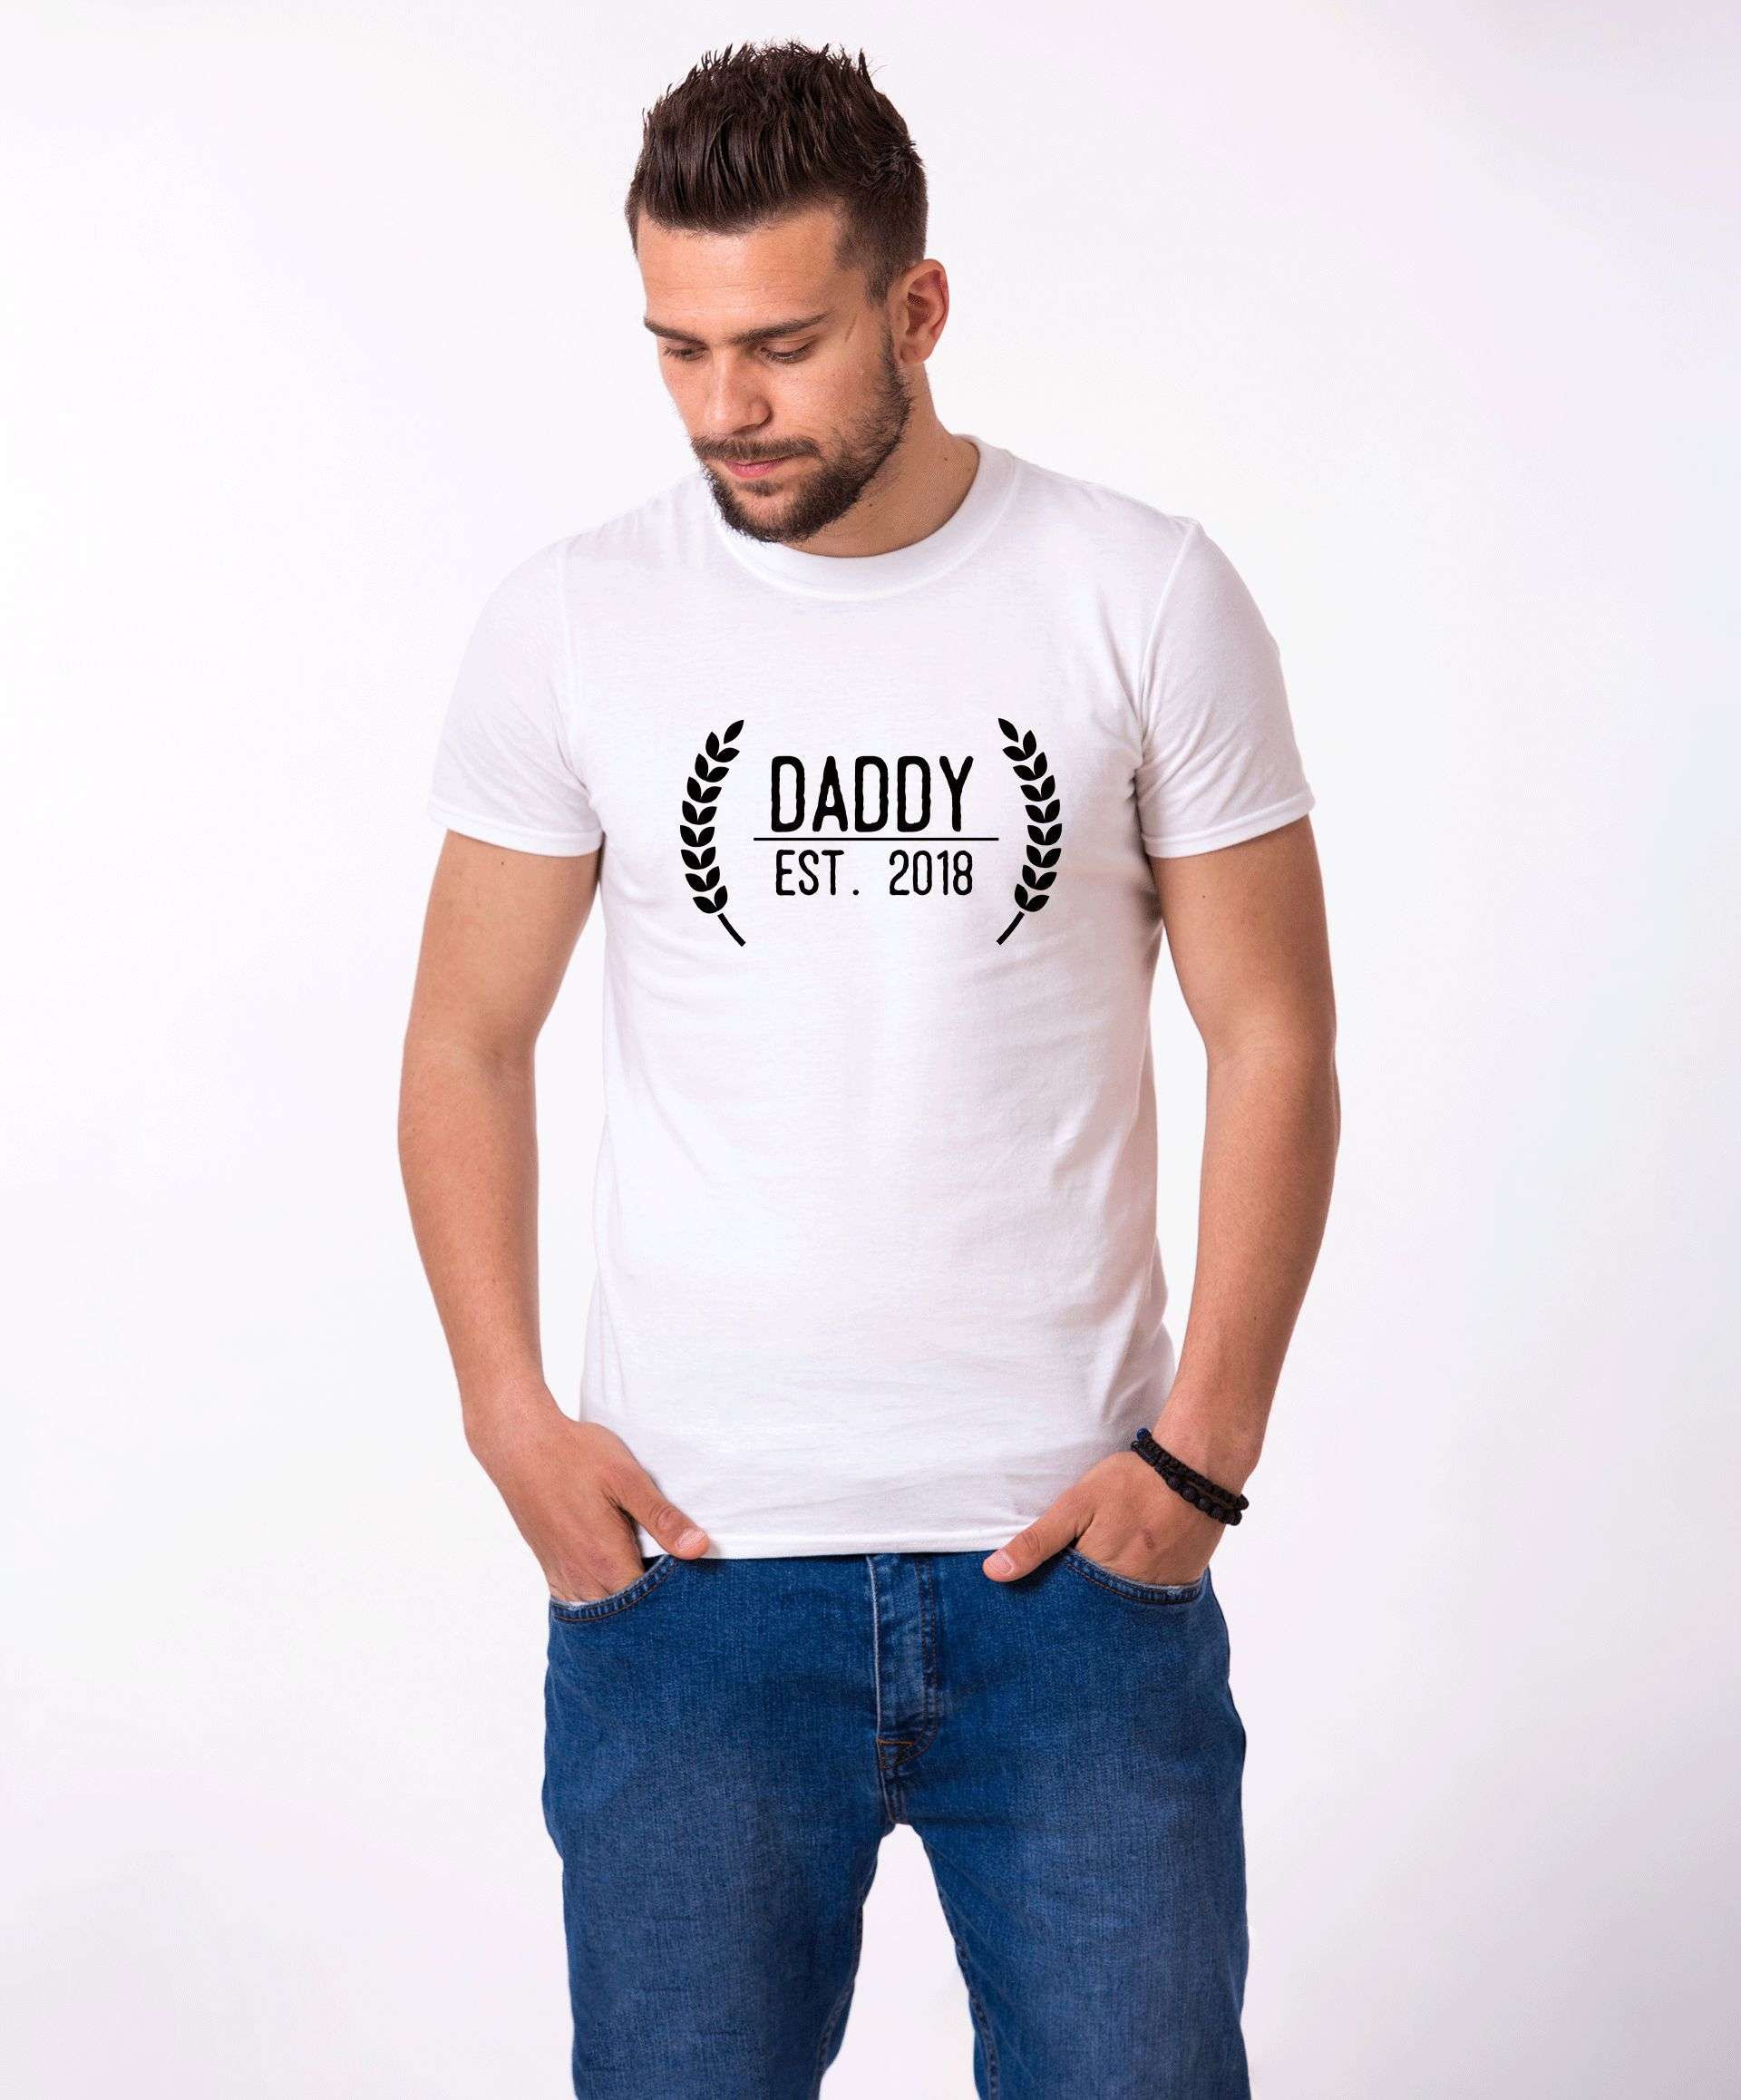 Daddy Est. Shirt, Daddy Shirt, Father's Day, Father's Day Shirt